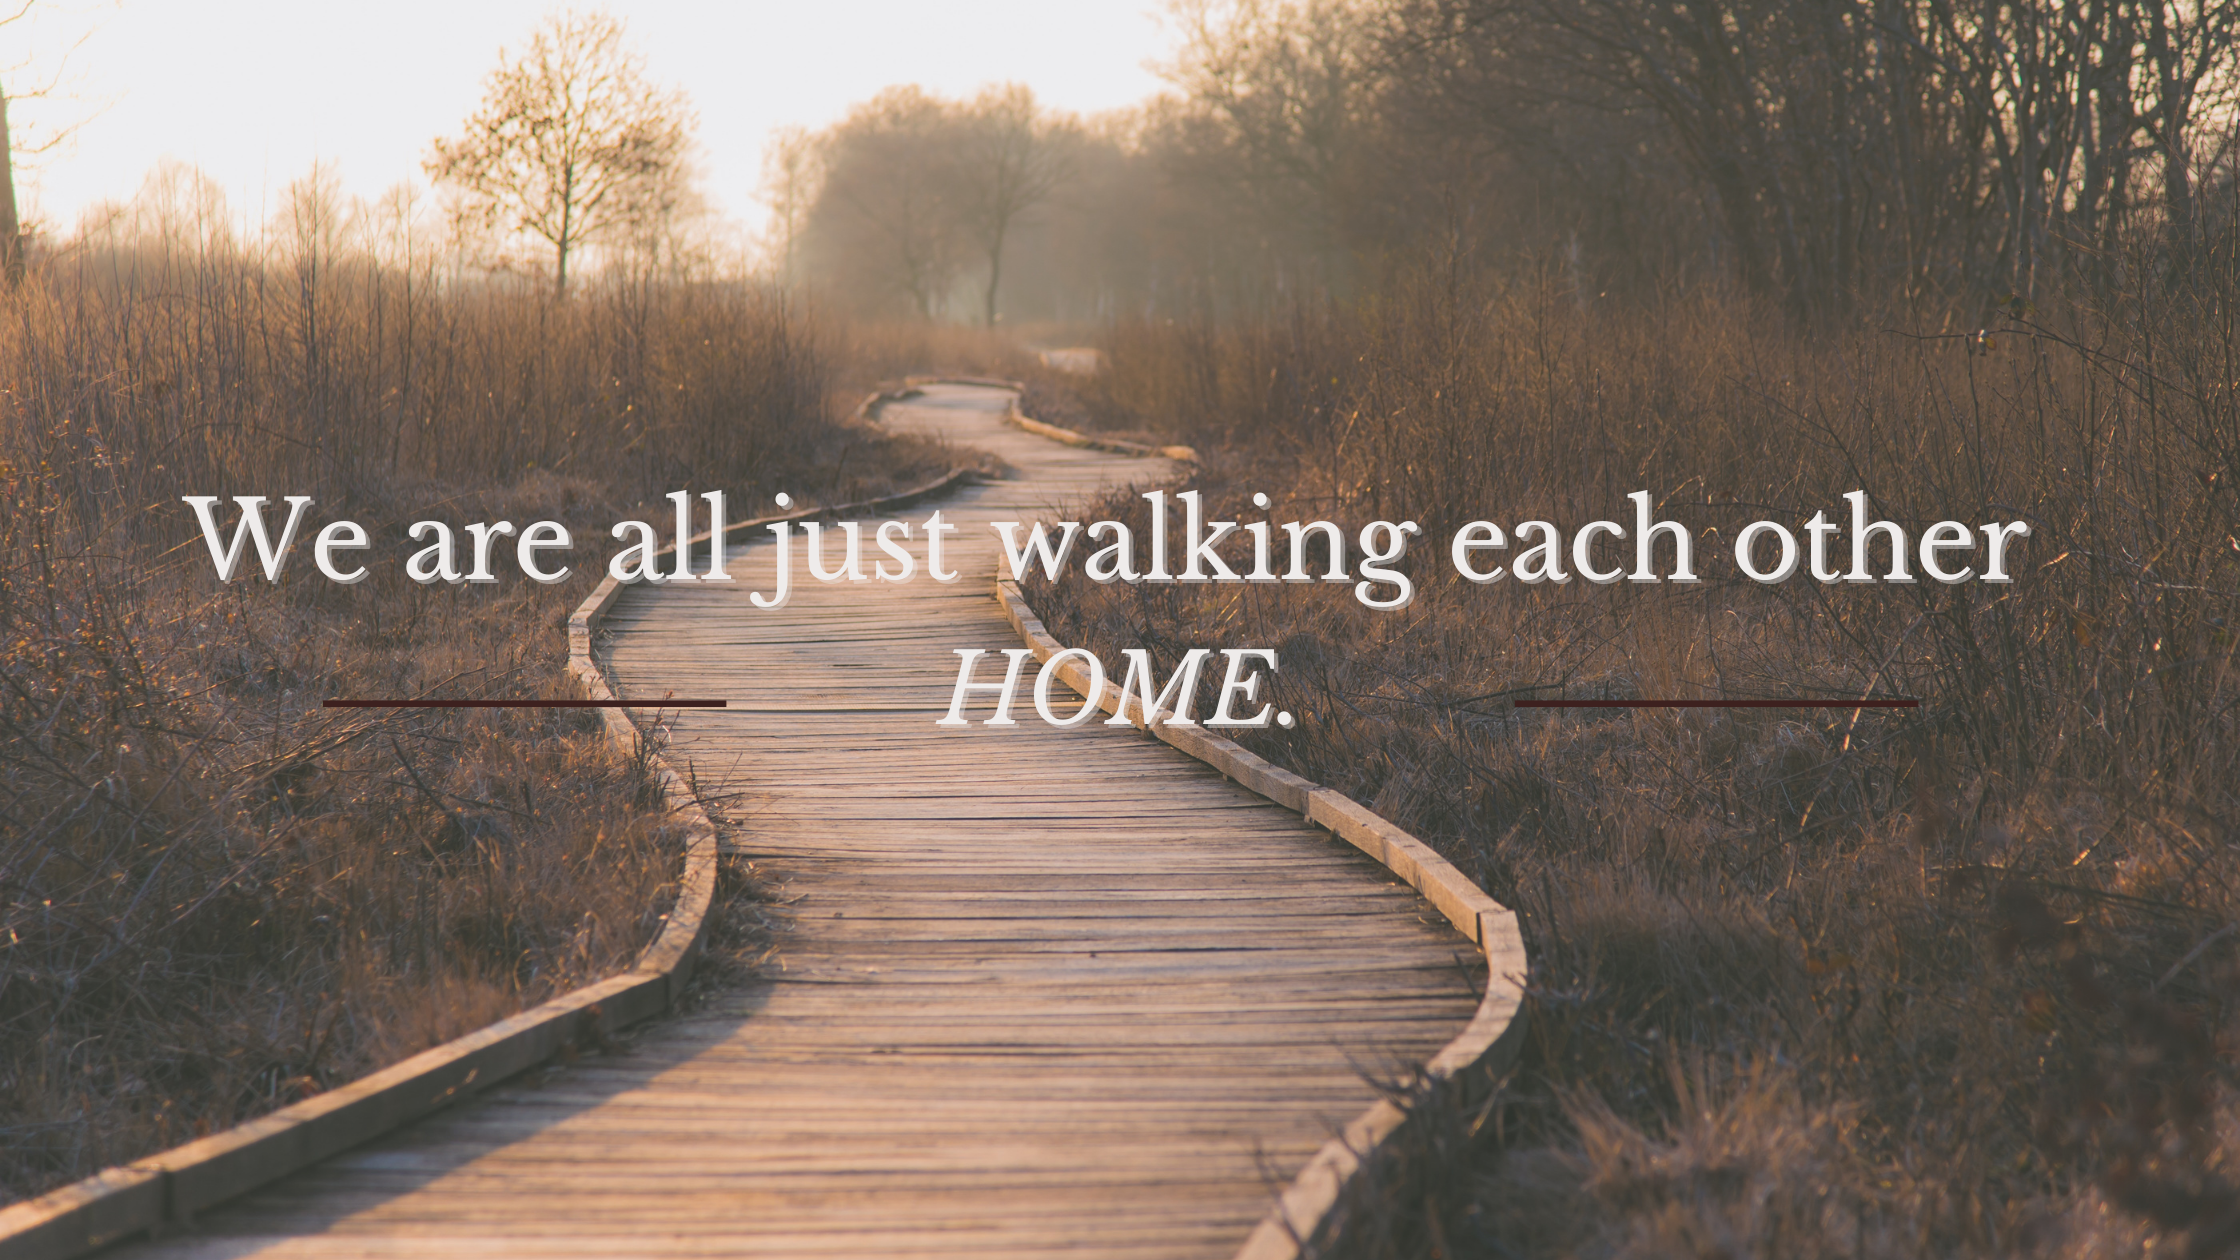 We are all just walking each other HOME!